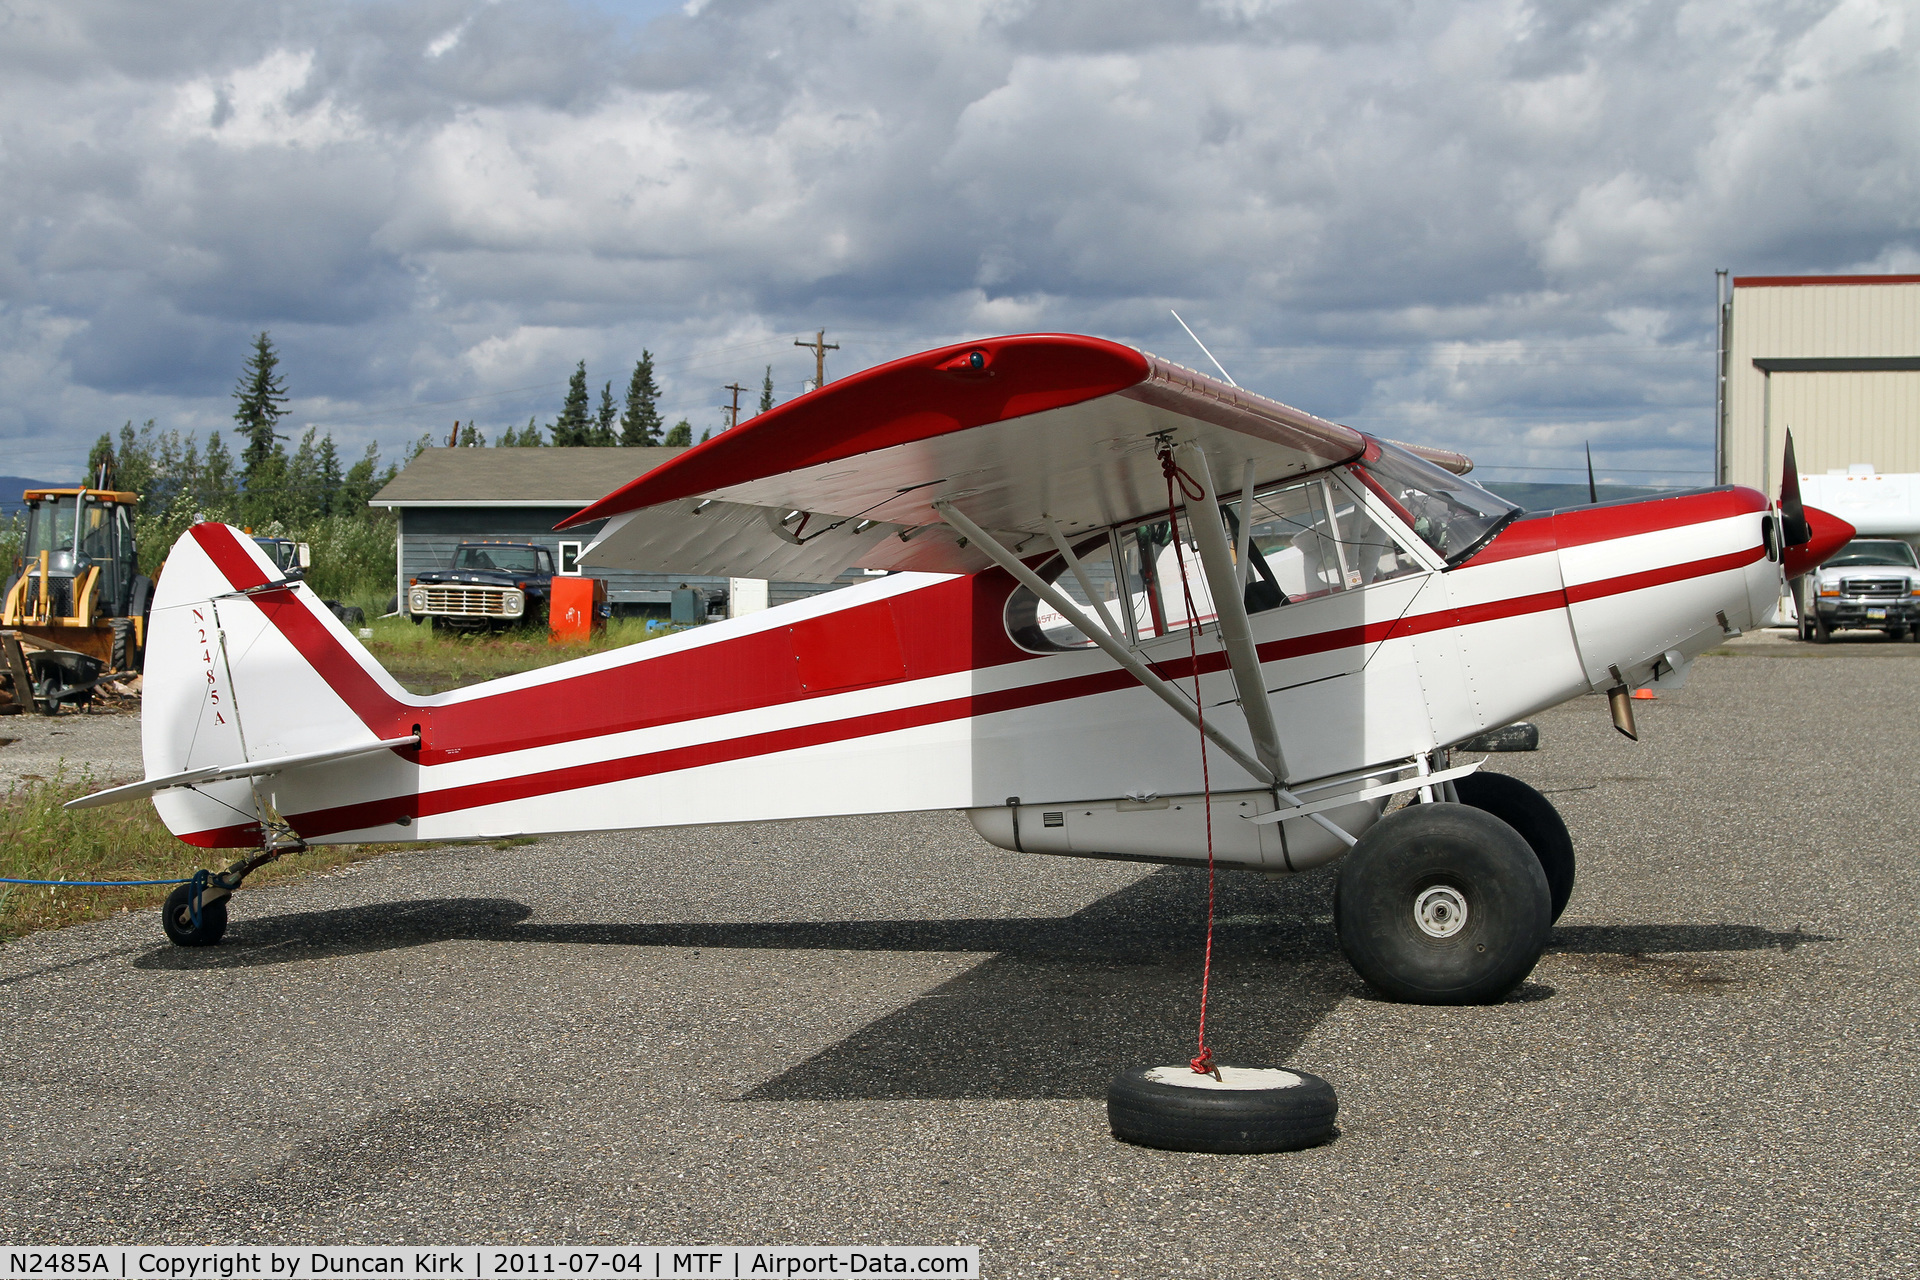 N2485A, 1952 Piper PA-18-150 Super Cub C/N 18-1954, Metro Field has a number of residences with tie downs or hangars